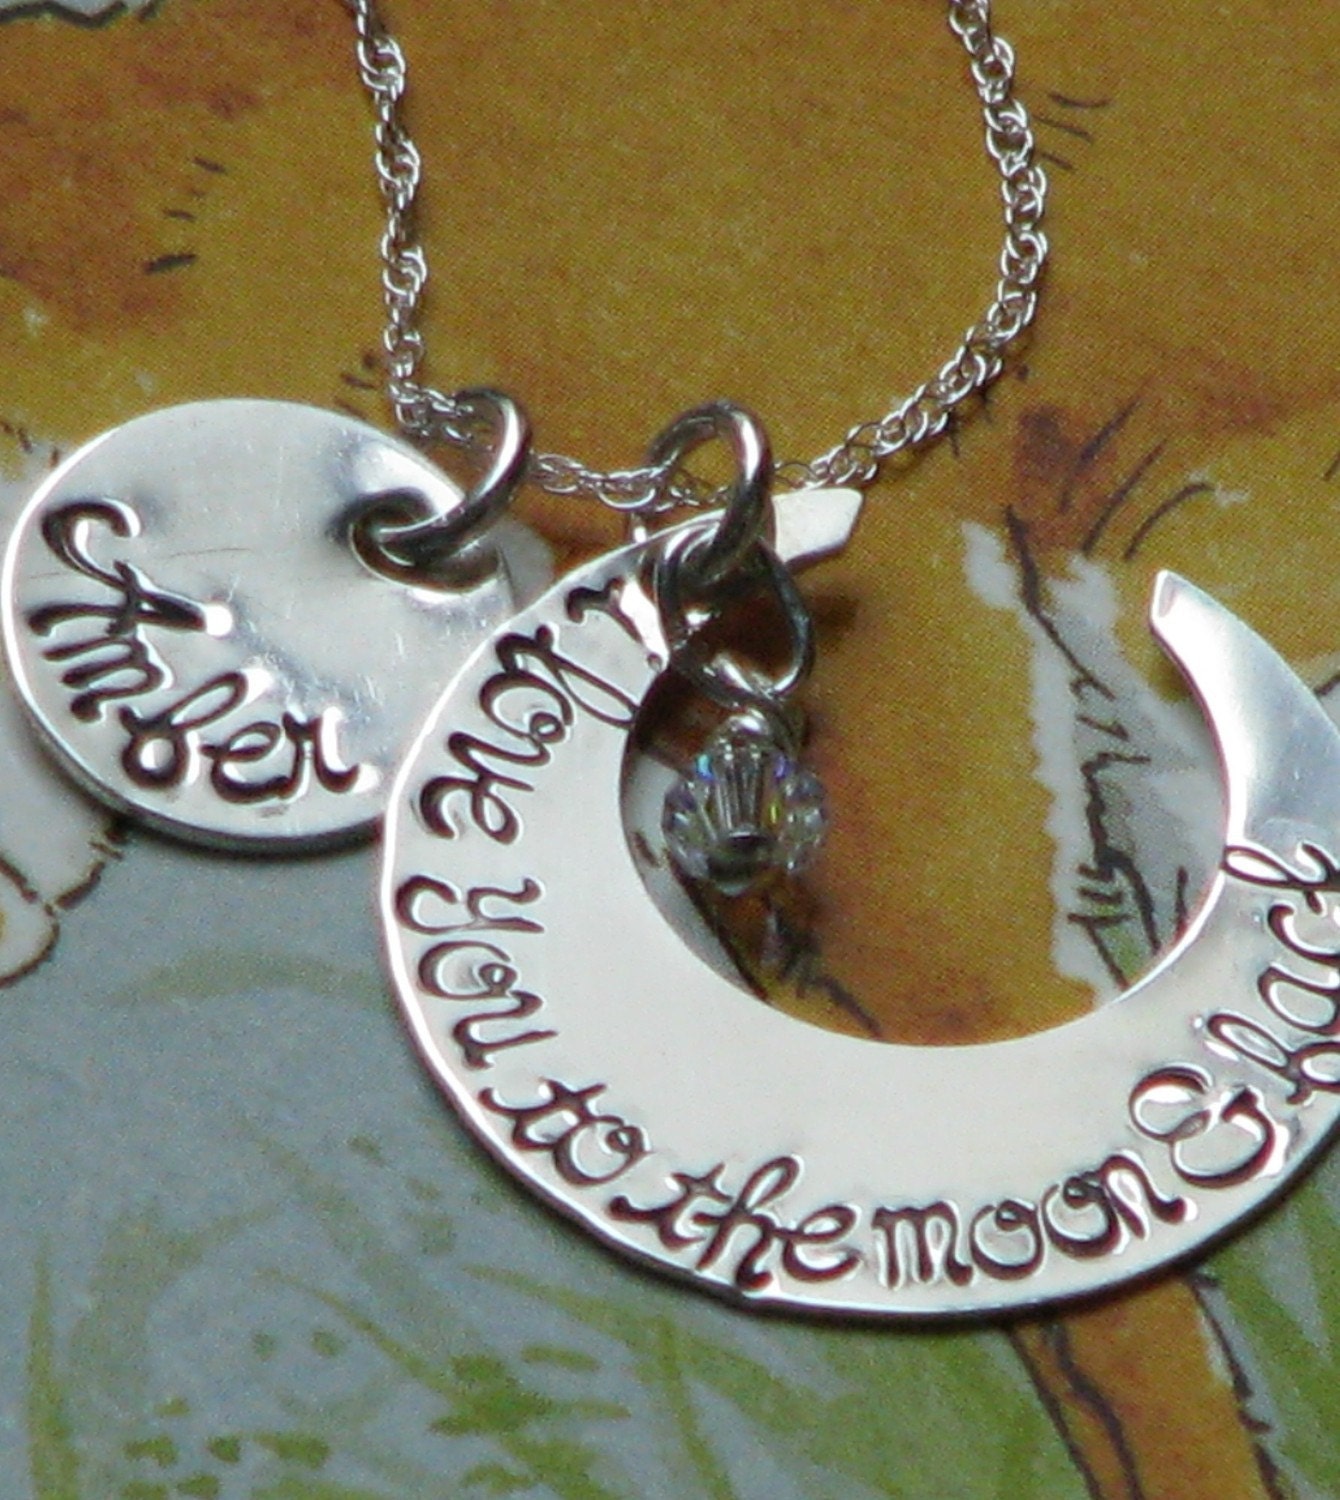 I love you to the moon and back necklace with name charm - sterling silver 